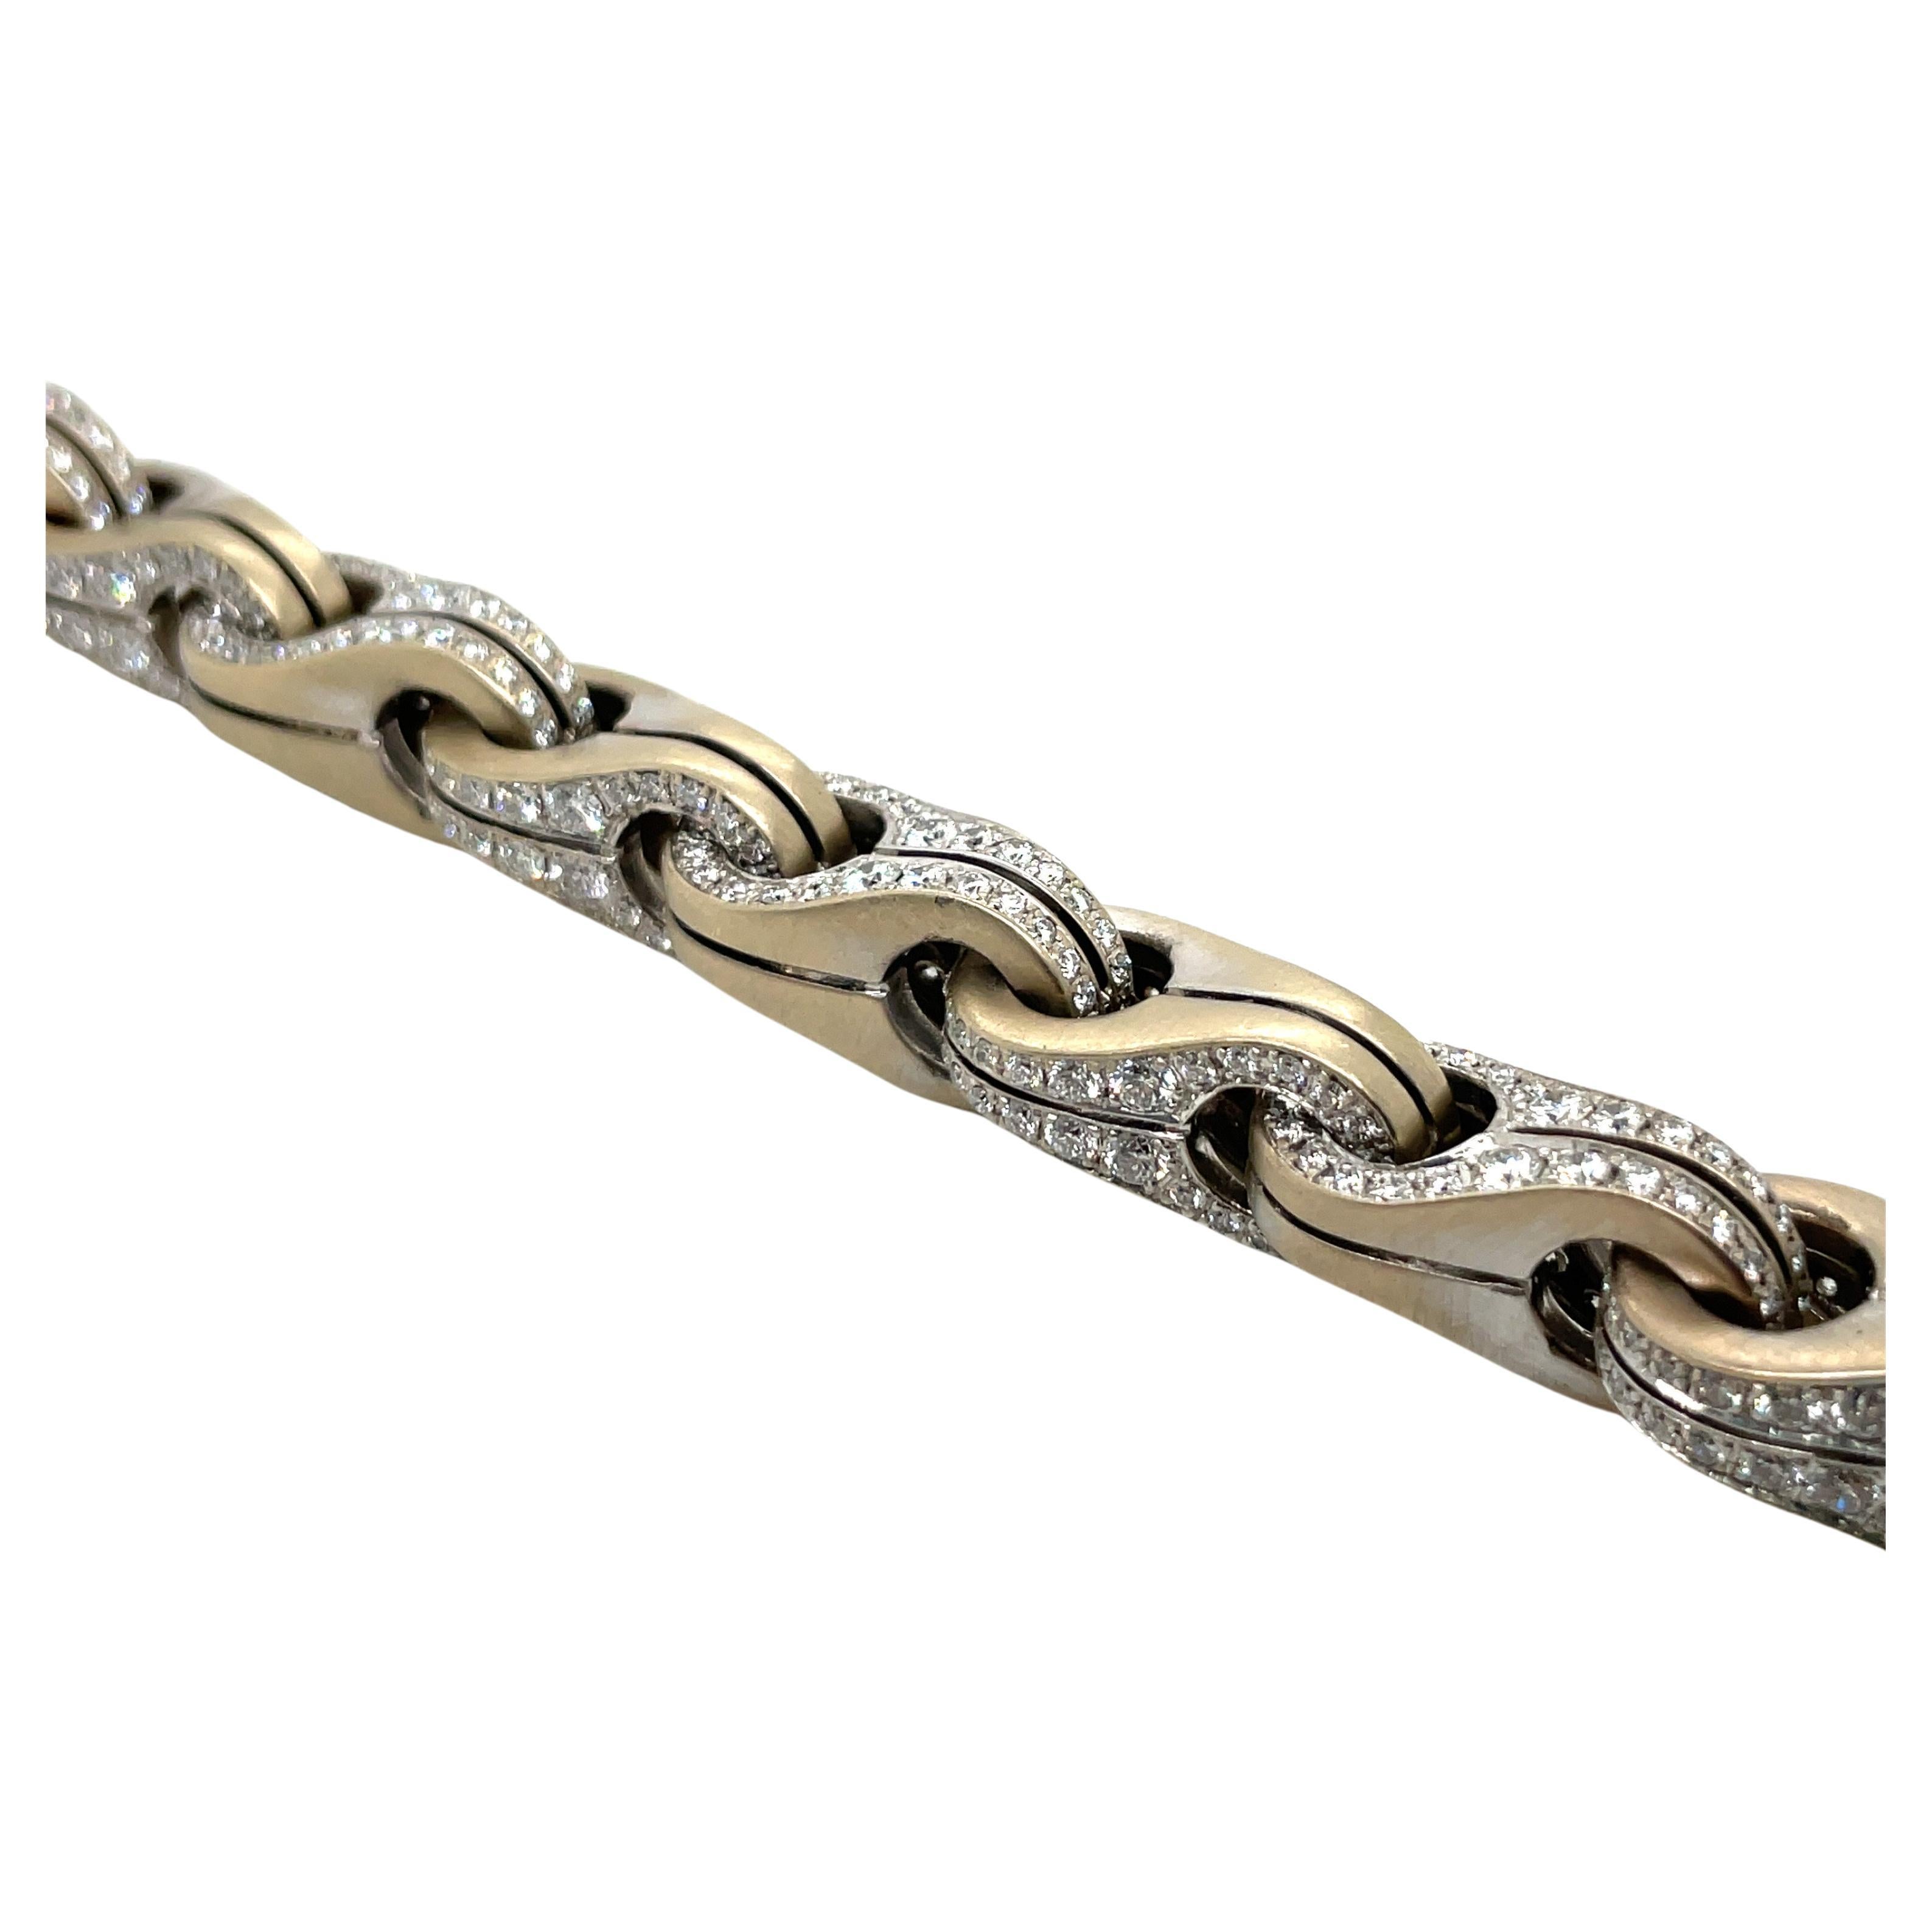 Di Modolo Fiamma Collection 18 Karat White Gold Diamond Link Bracelet 13 Carats In Excellent Condition For Sale In New York, NY